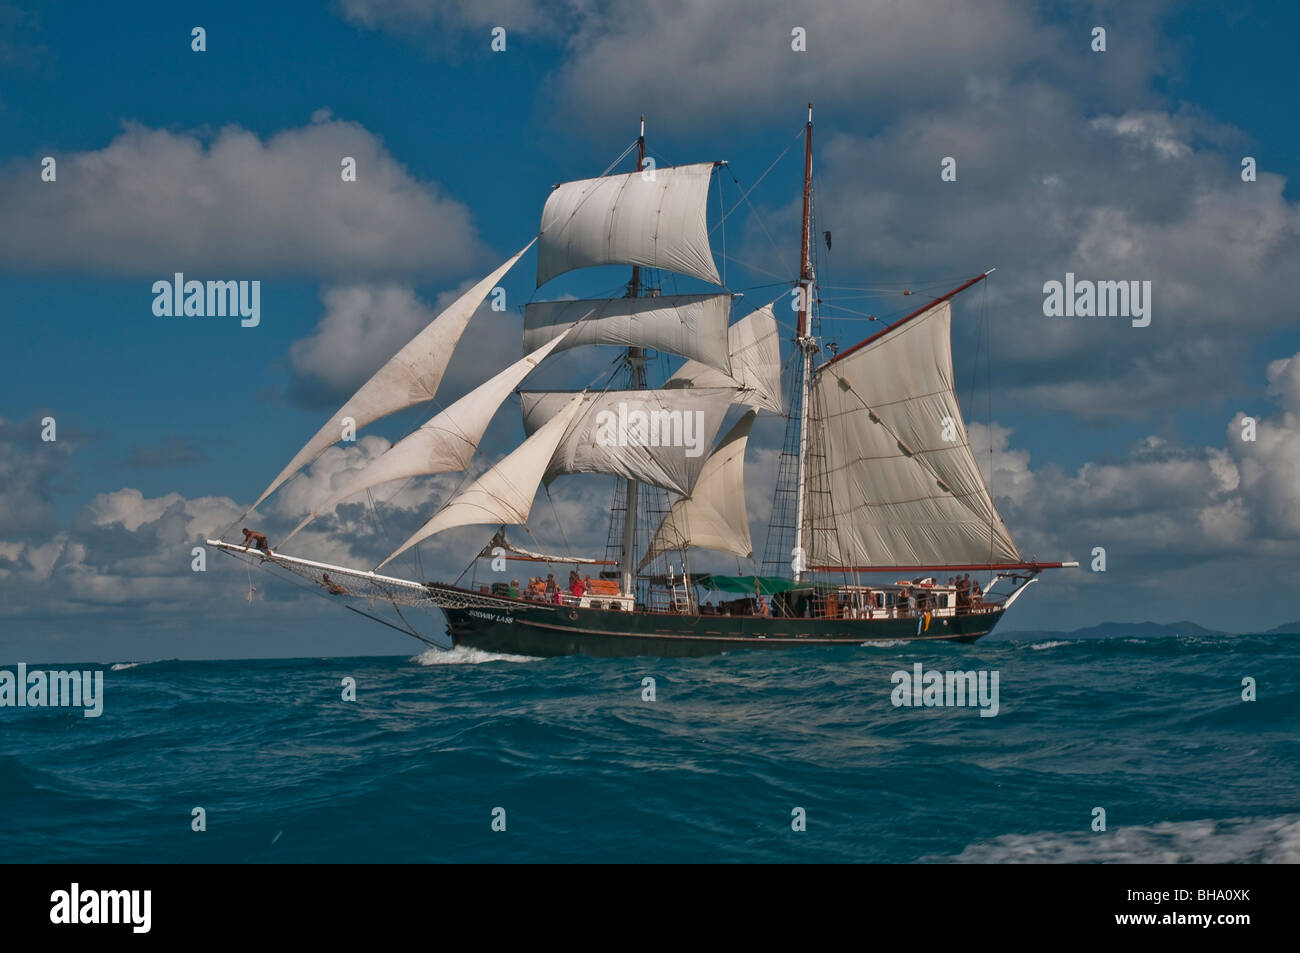 The Solway Lass 125 foot schooner built in 1906 sailing in the Whitsunday Islands on the Great Barrier Reef Stock Photo